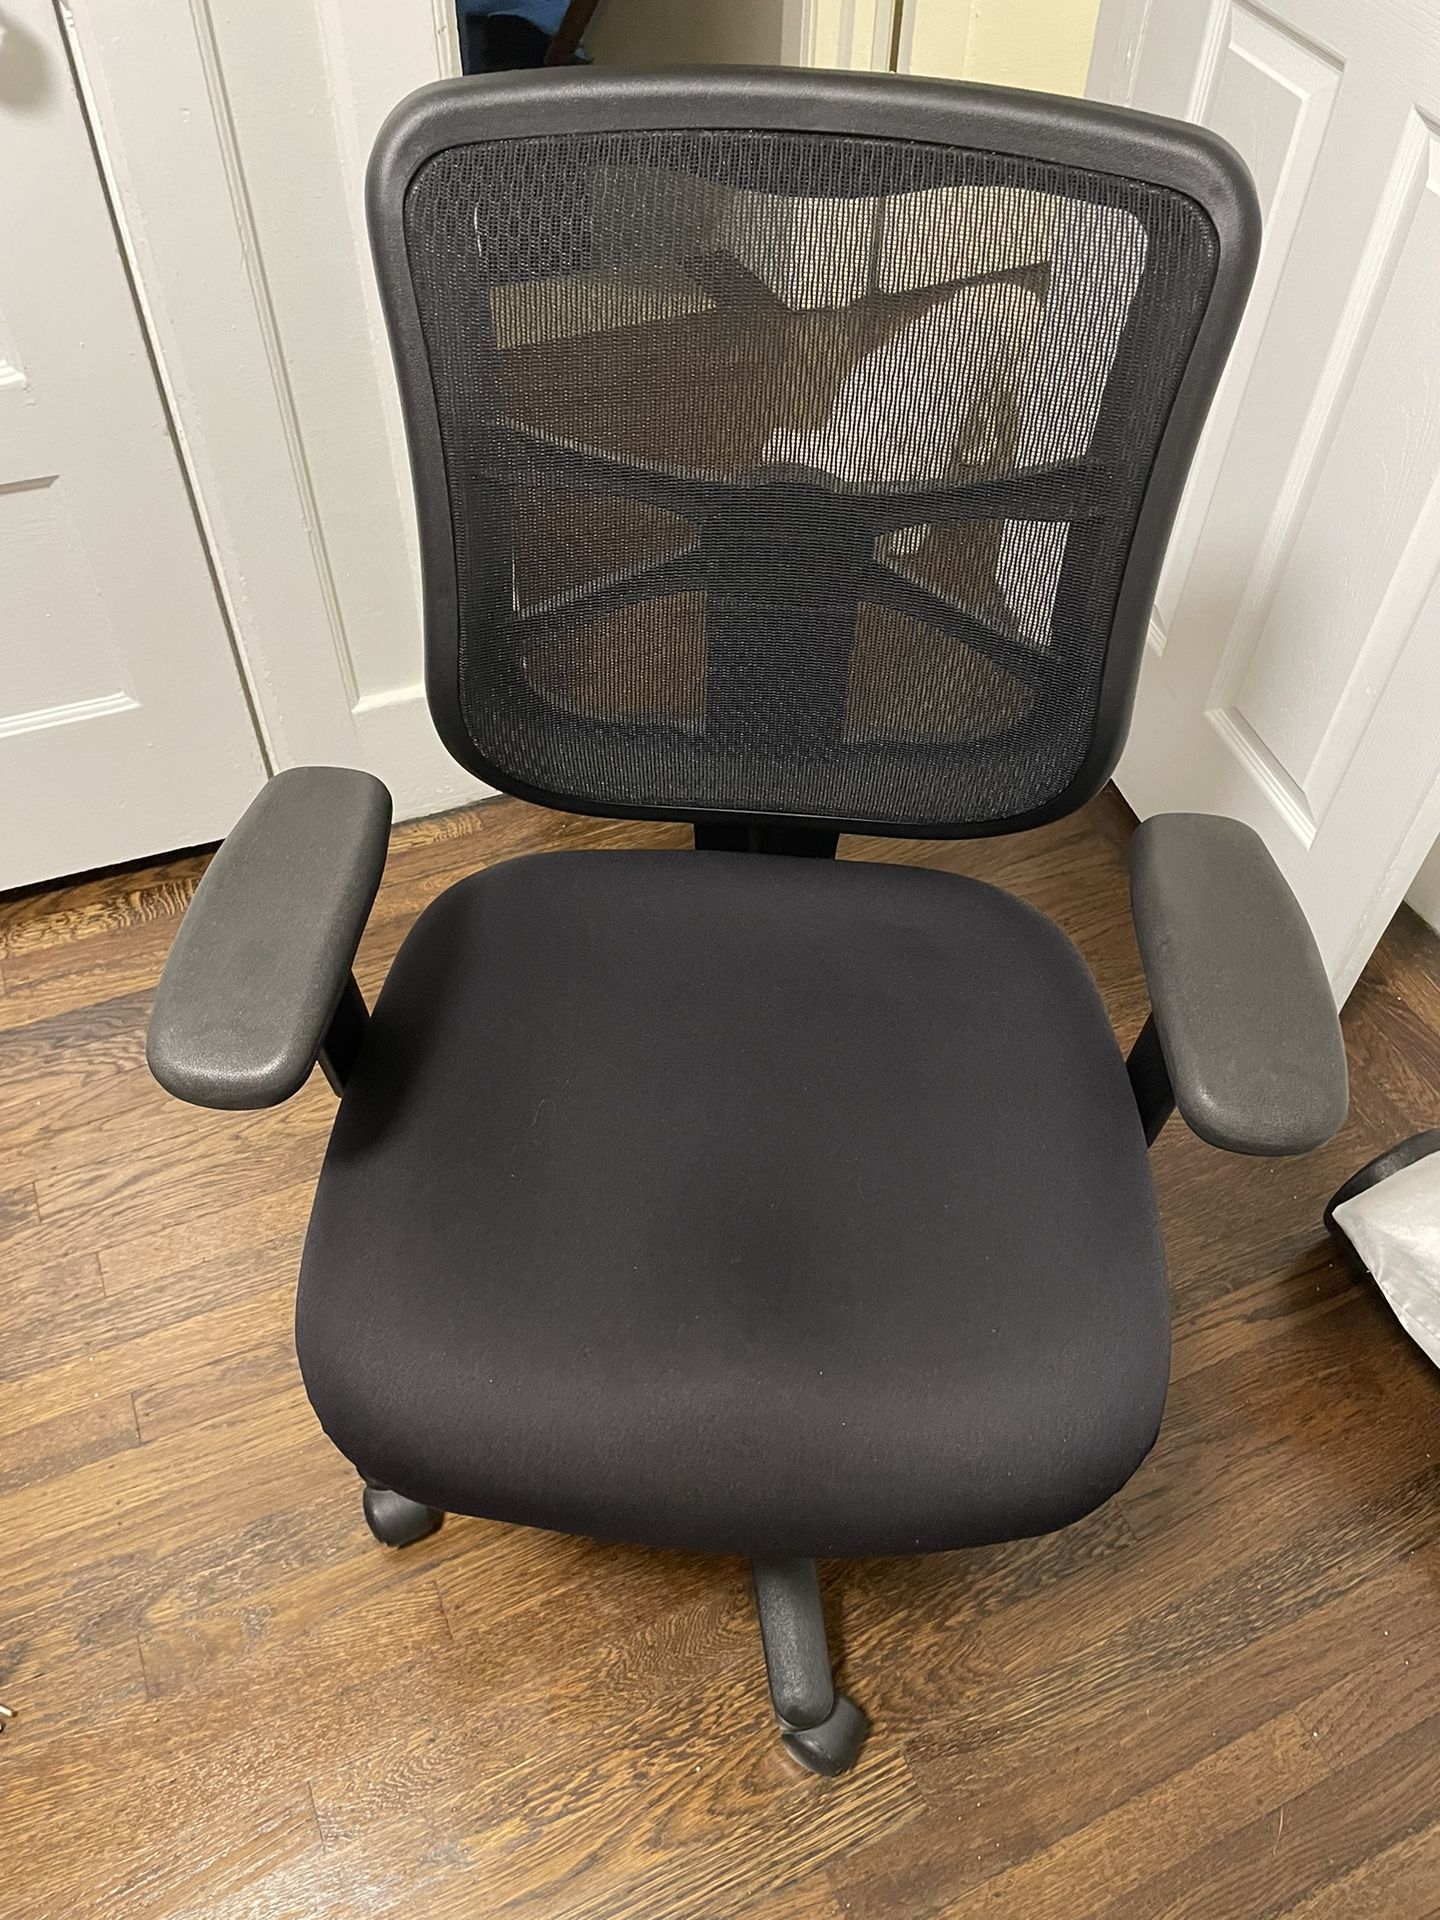 Adjustable Rolling Office Chair